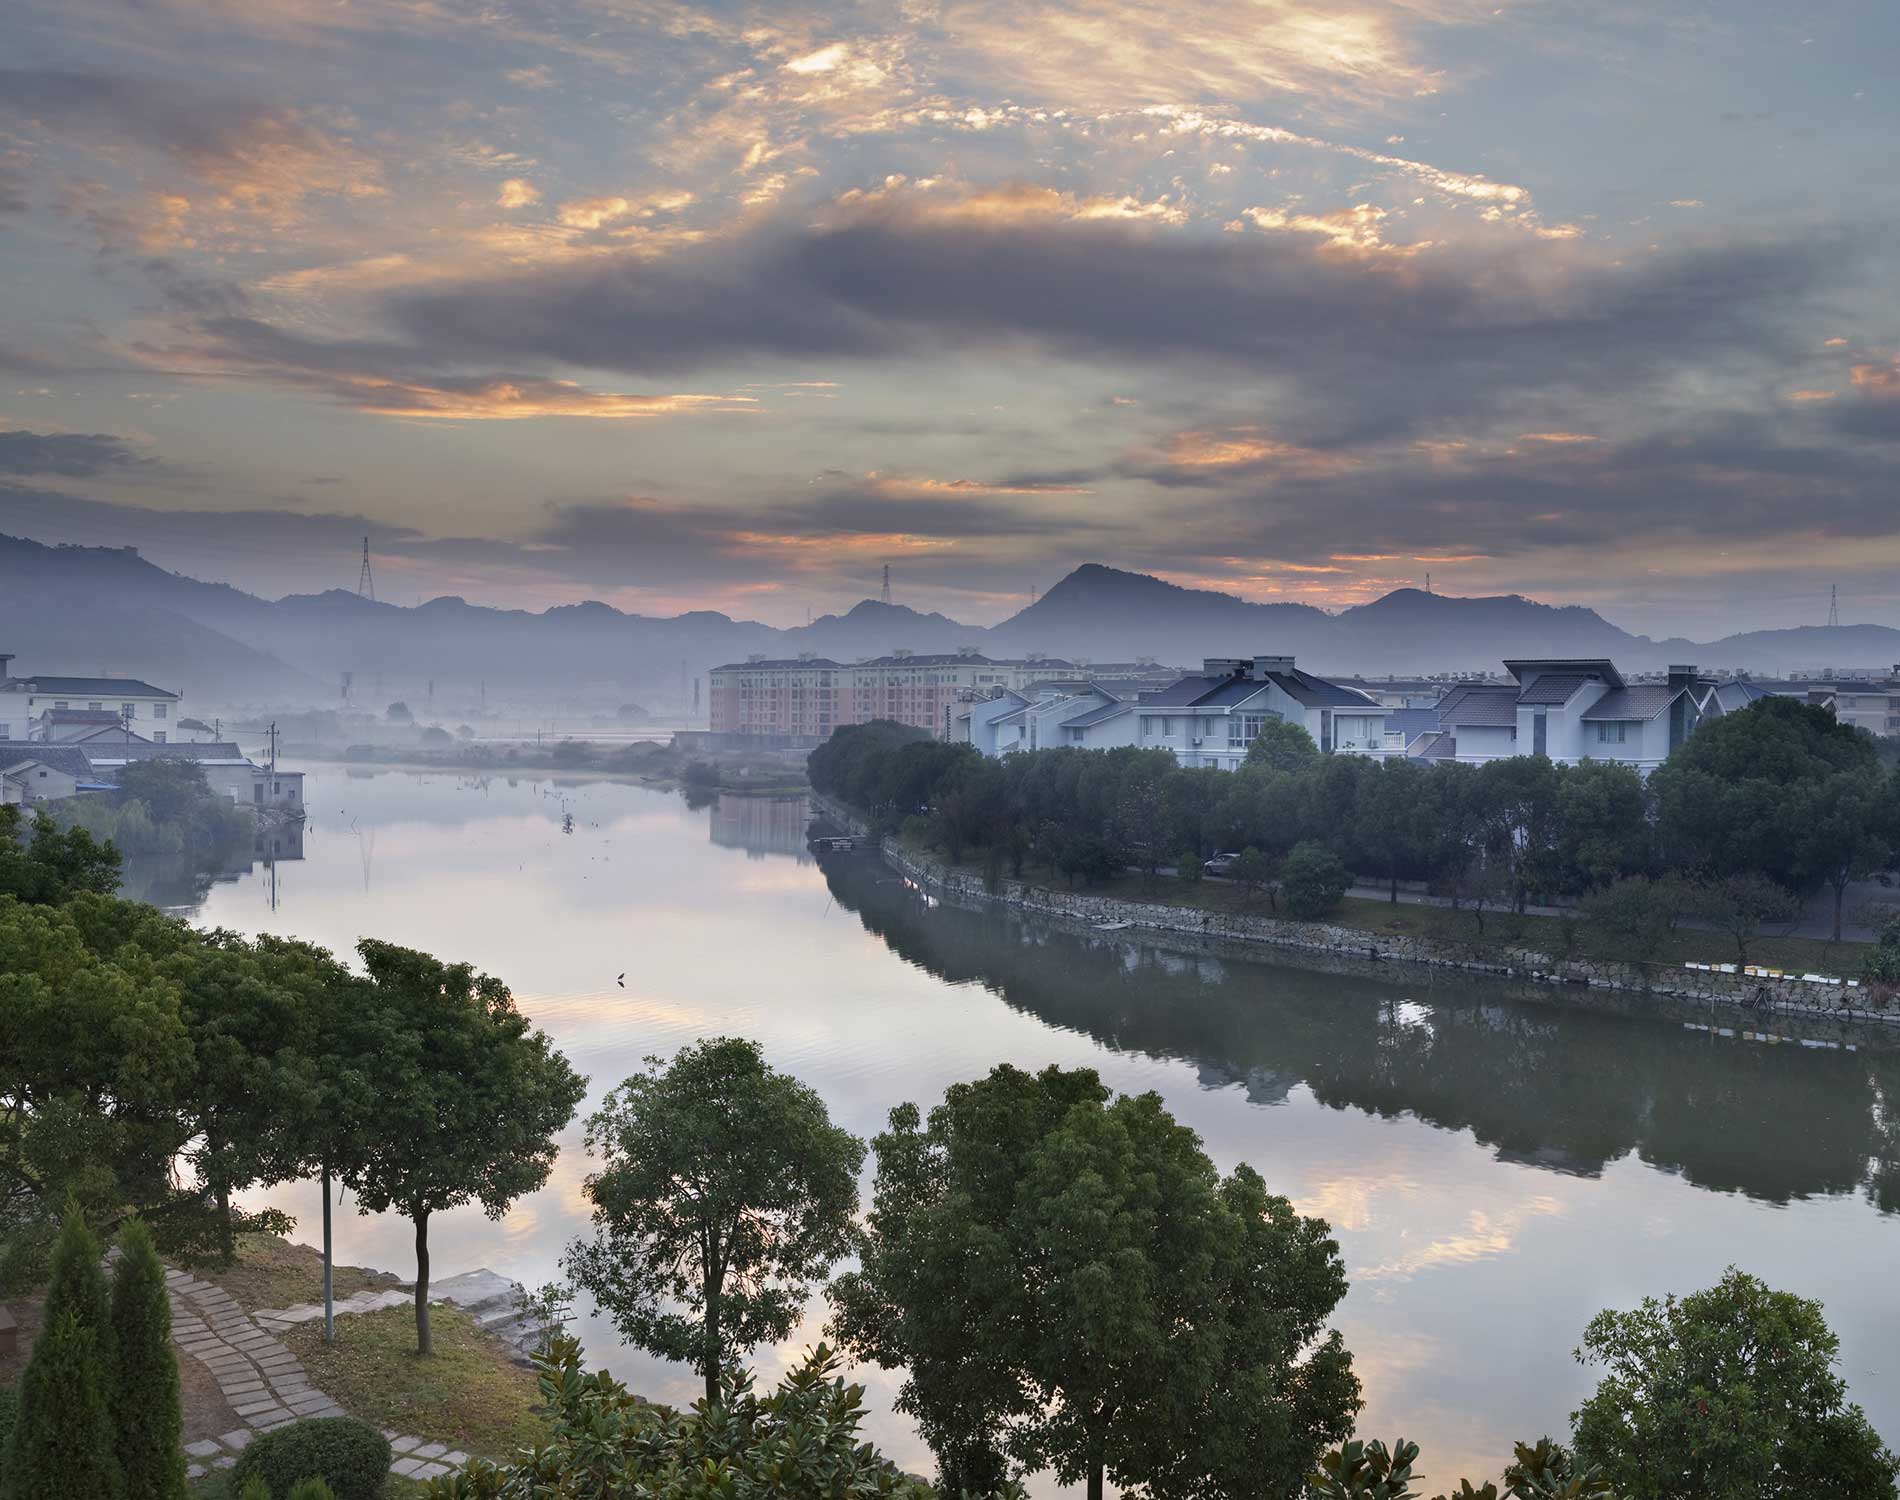 /-/media/images/website/background-images/offices/wenzhou/wenzhou_city_1900x1500px.ashx?sc_lang=ru-ru